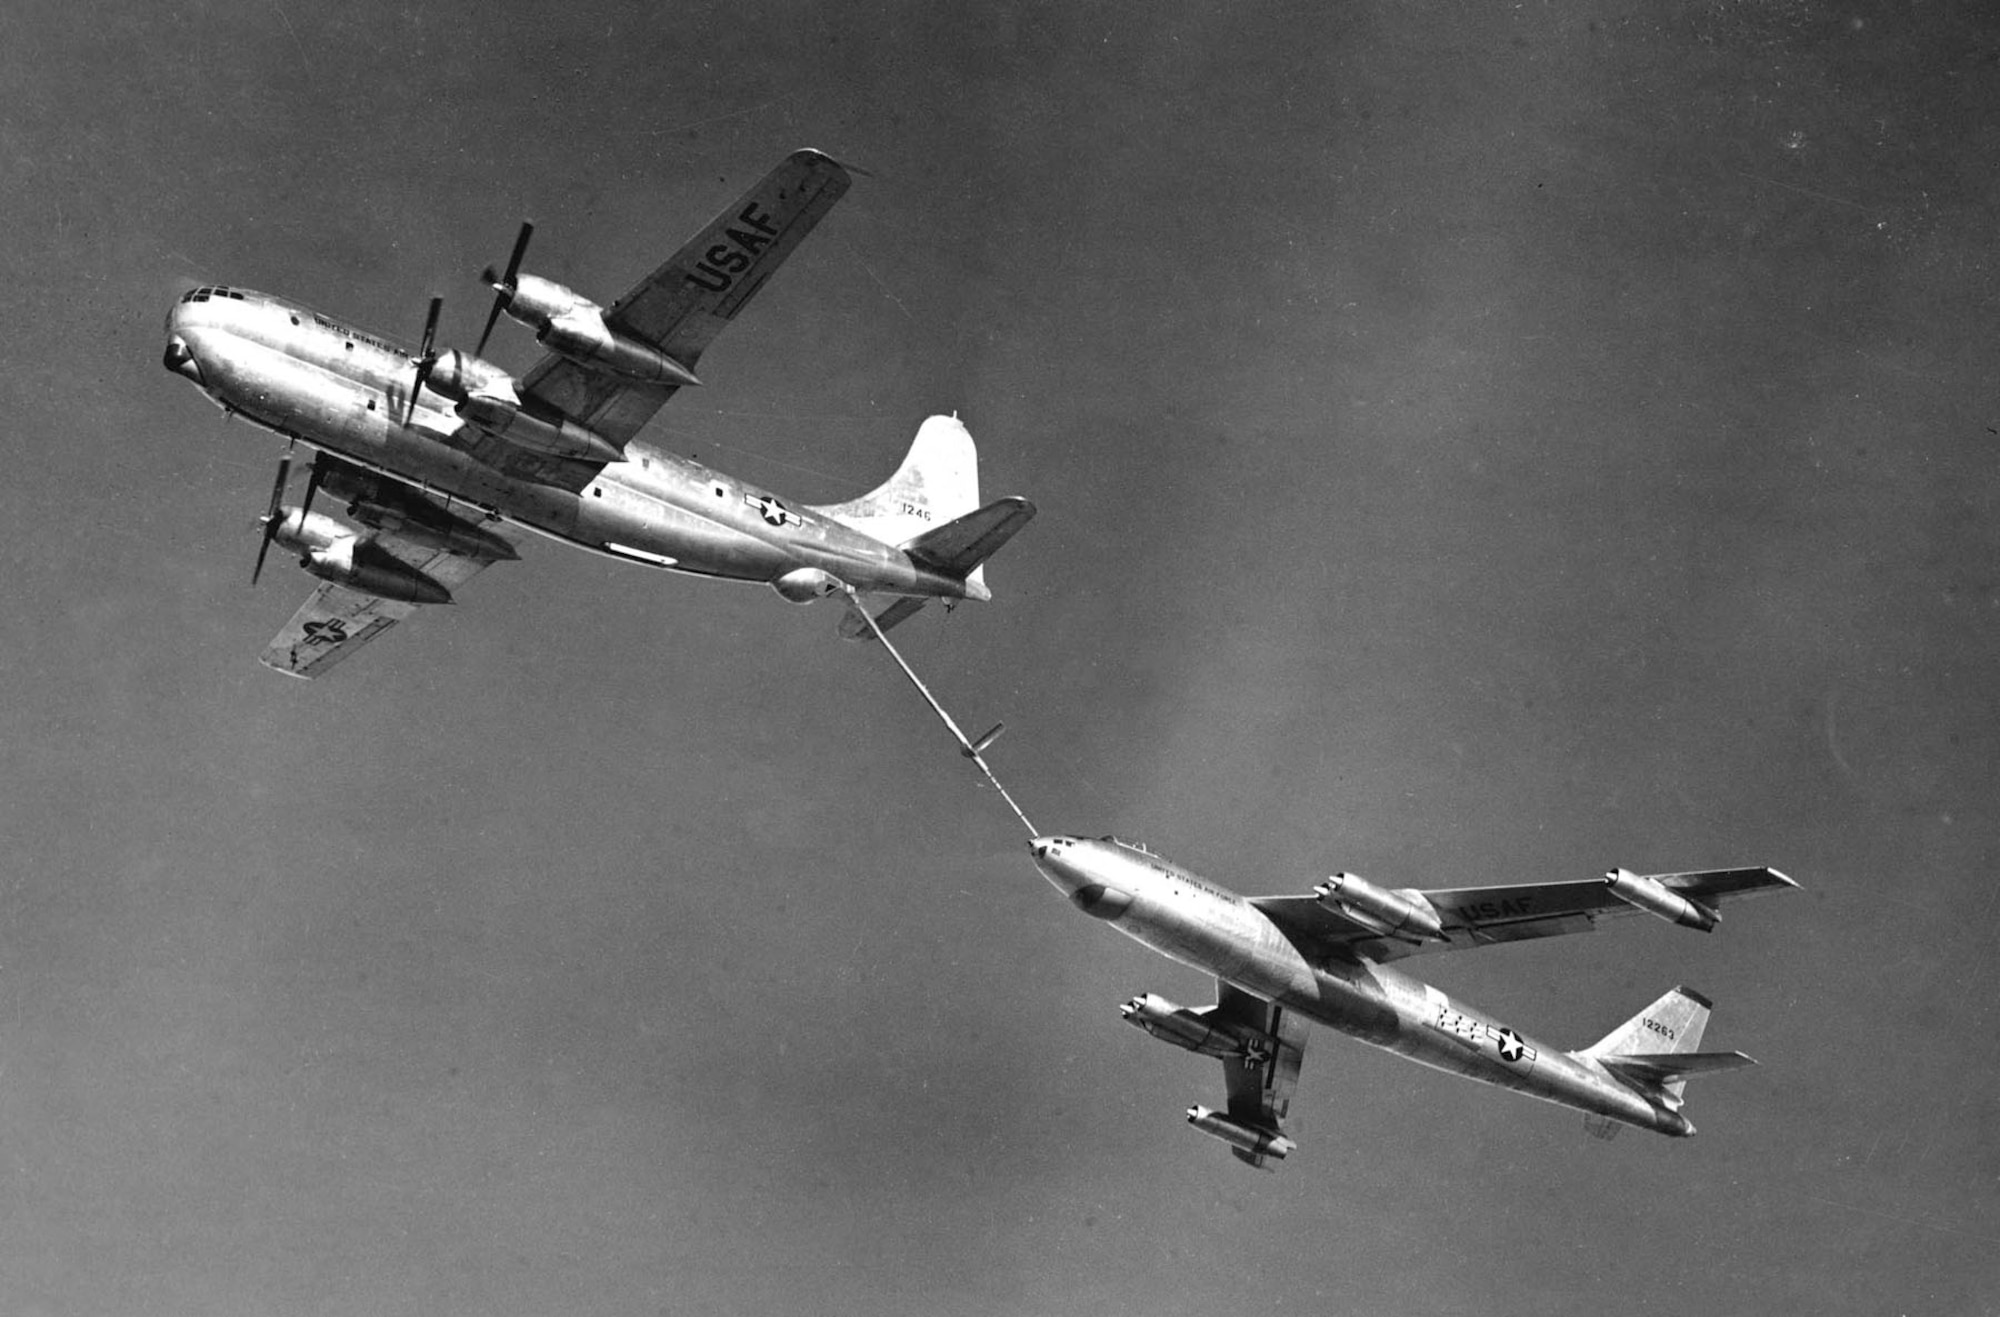 Boeing RB-47 refueled by Boeing KC-97. (U.S. Air Force photo)